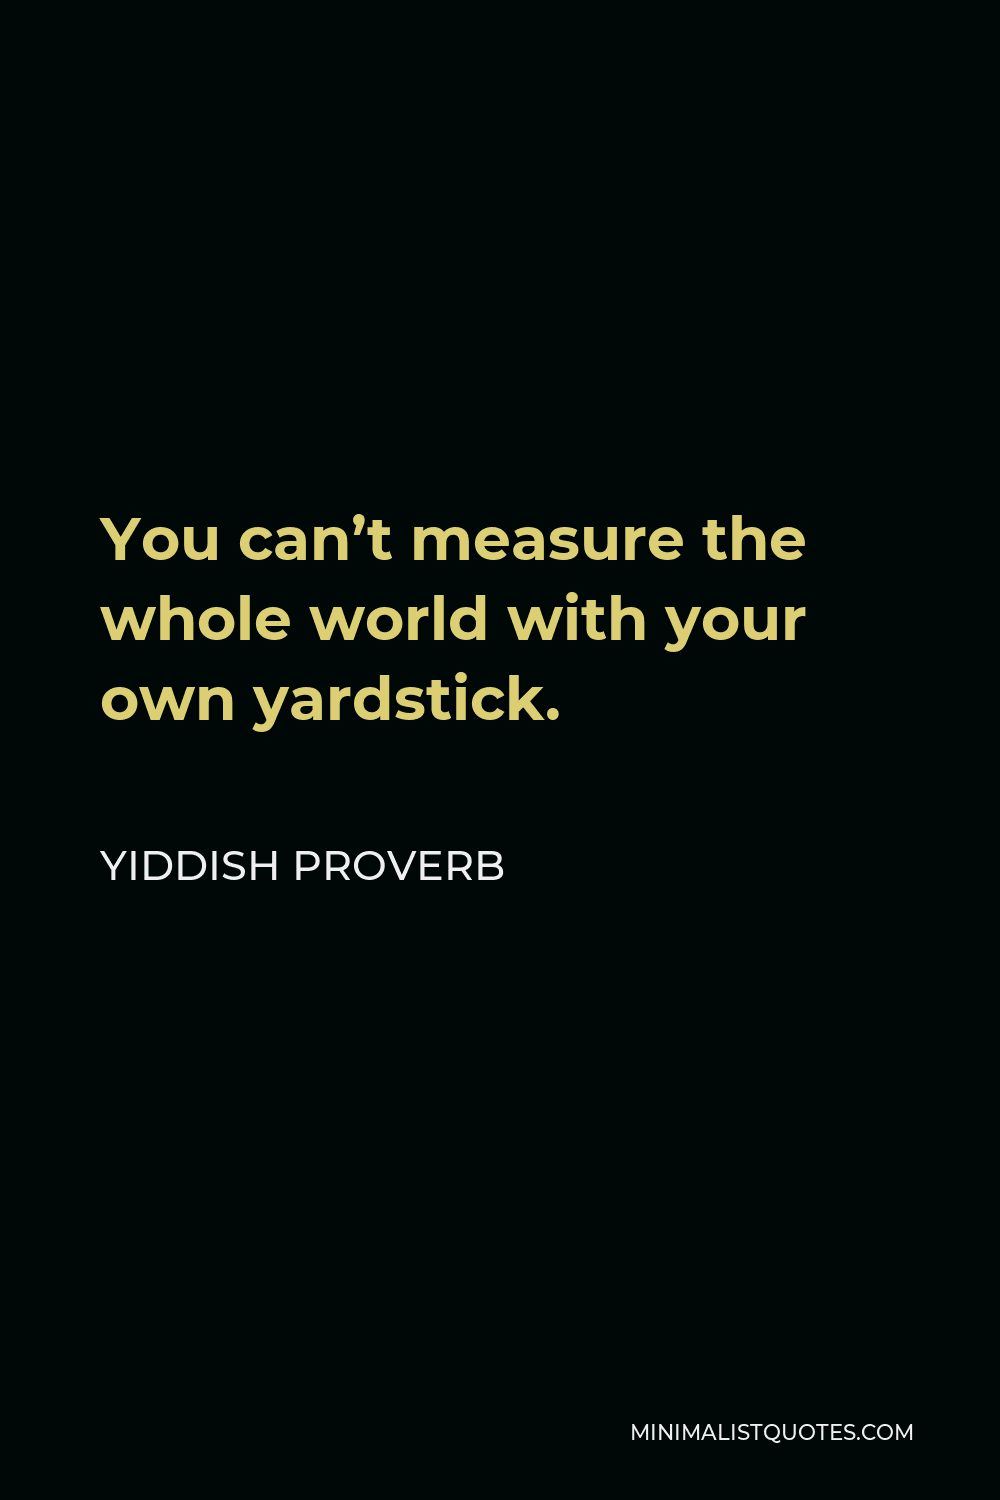 Yiddish Proverb Quote - You can’t measure the whole world with your own yardstick.